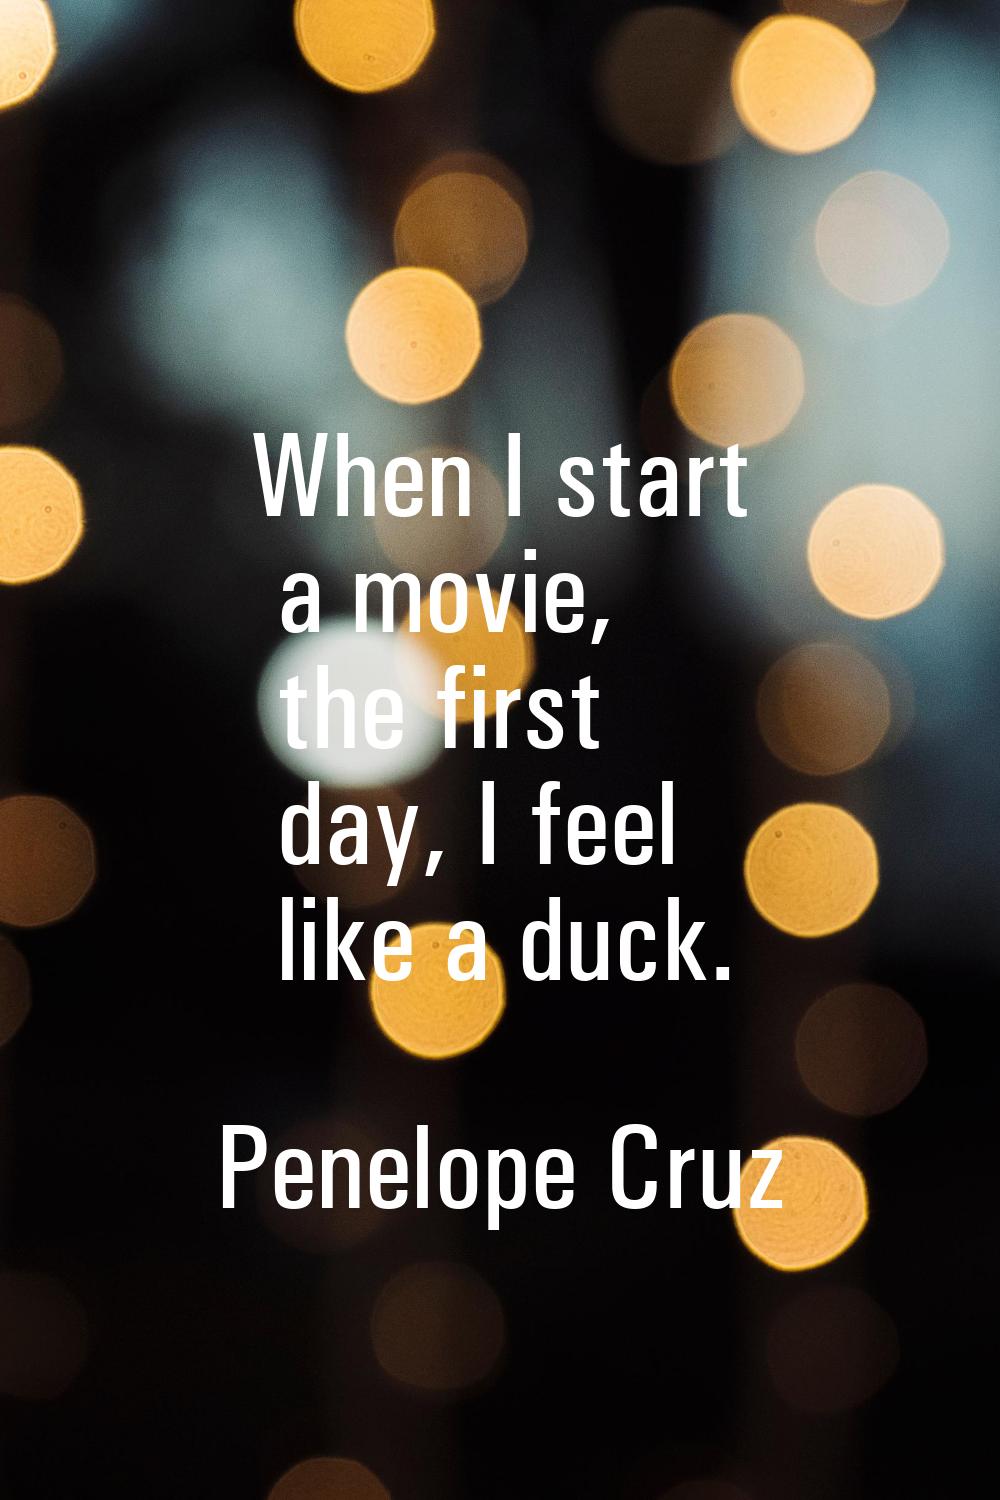 When I start a movie, the first day, I feel like a duck.